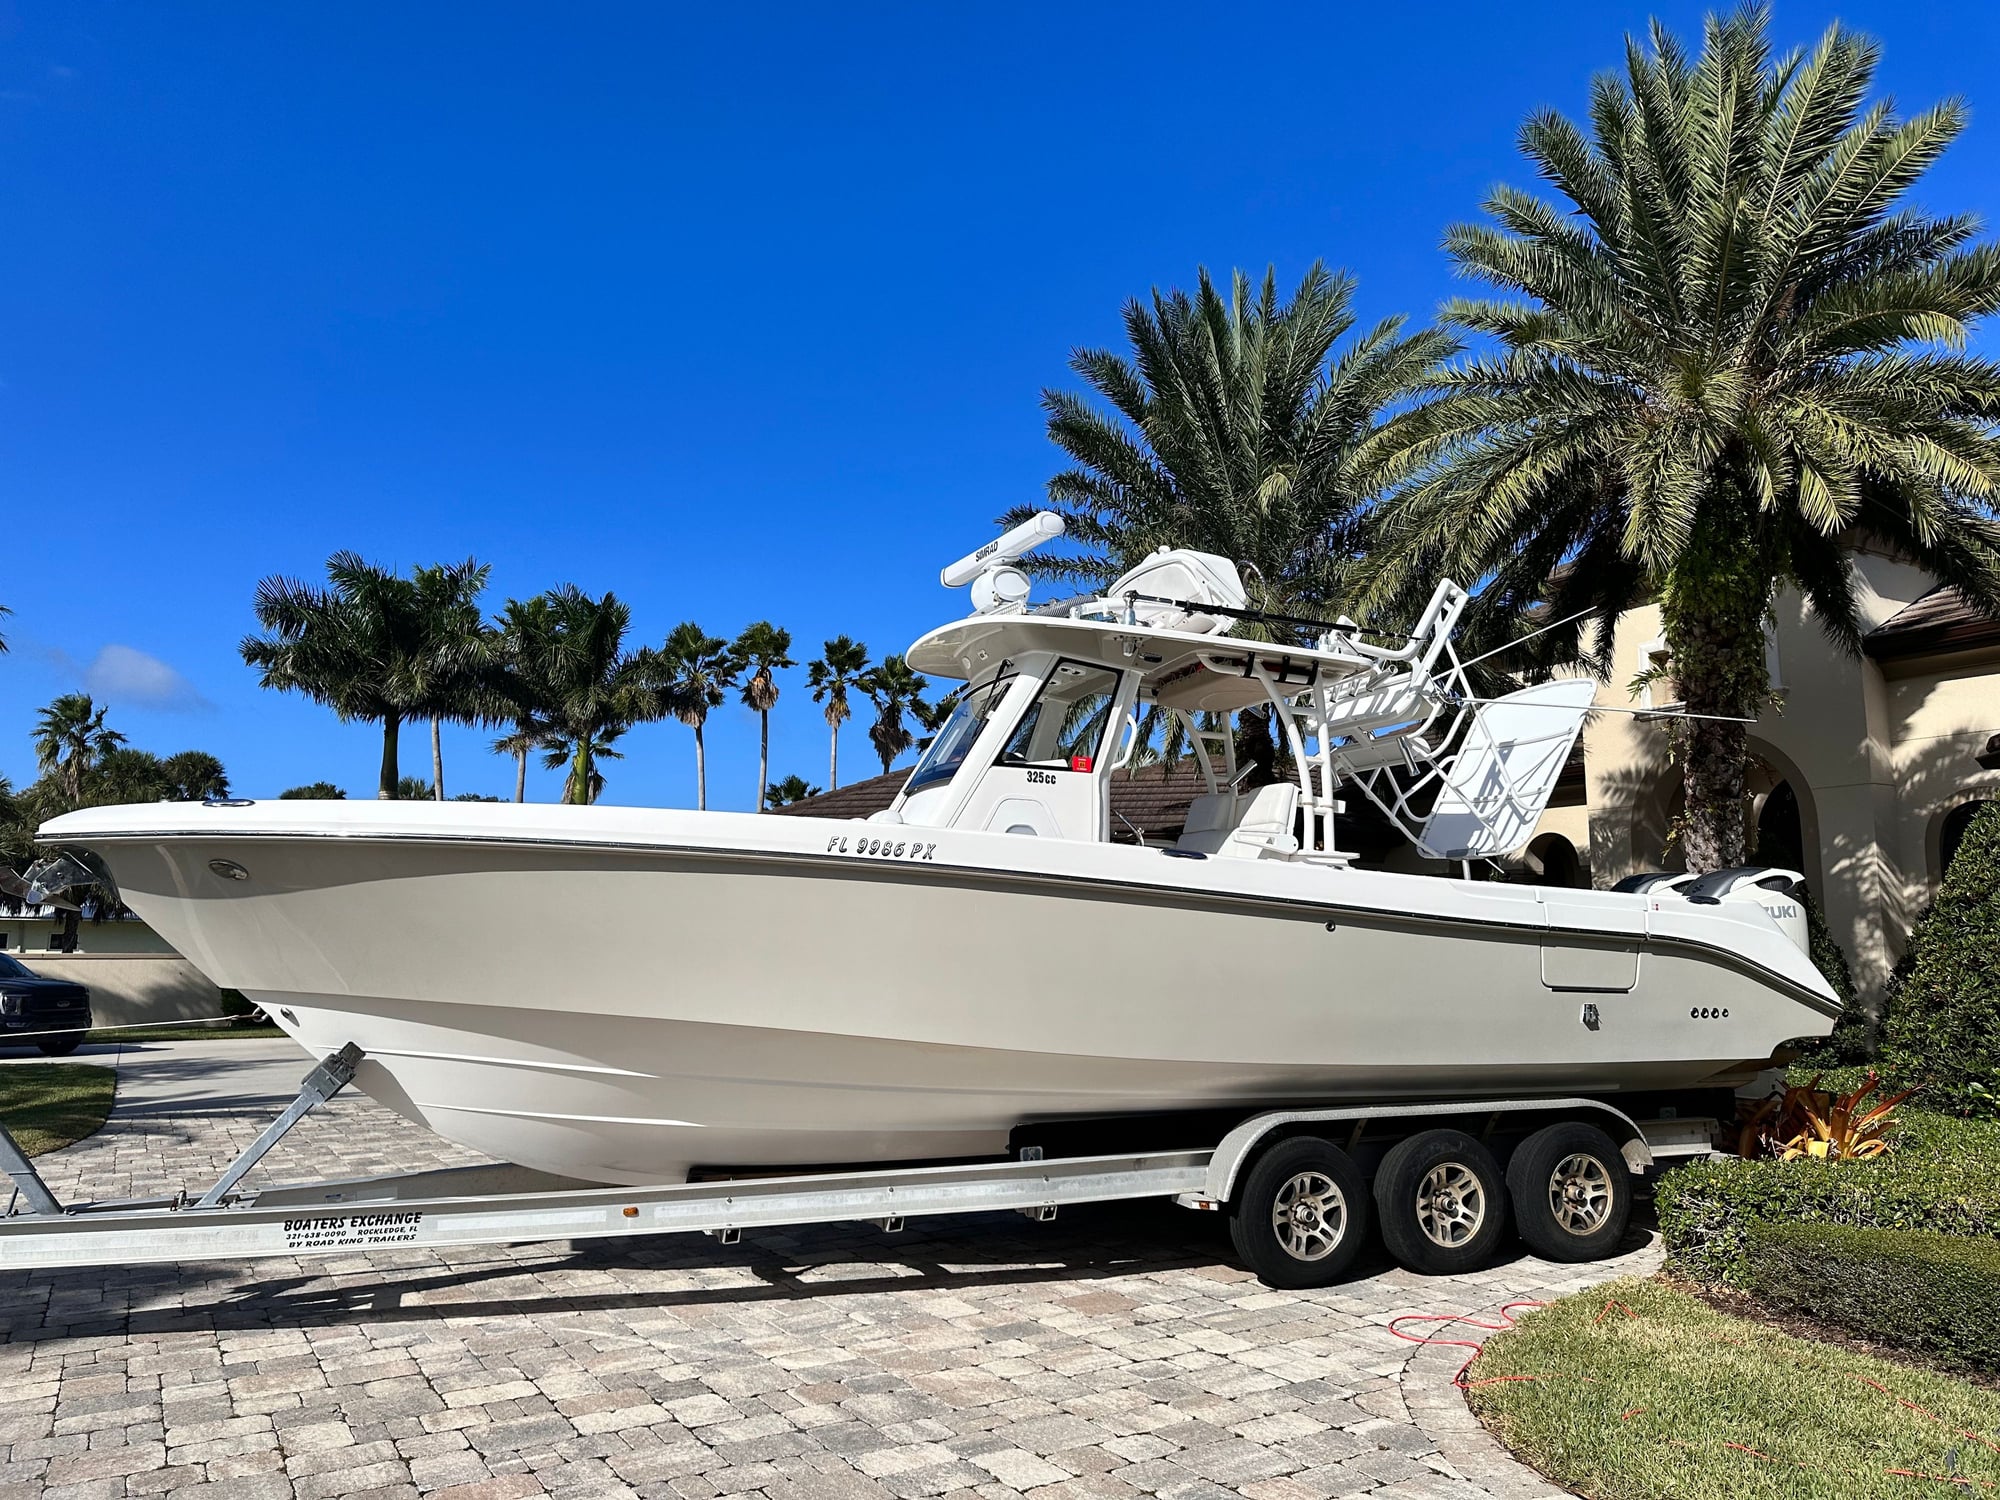 SOLD: 2014 Everglades 325CC with Tower $265,000 - The Hull Truth - Boating  and Fishing Forum